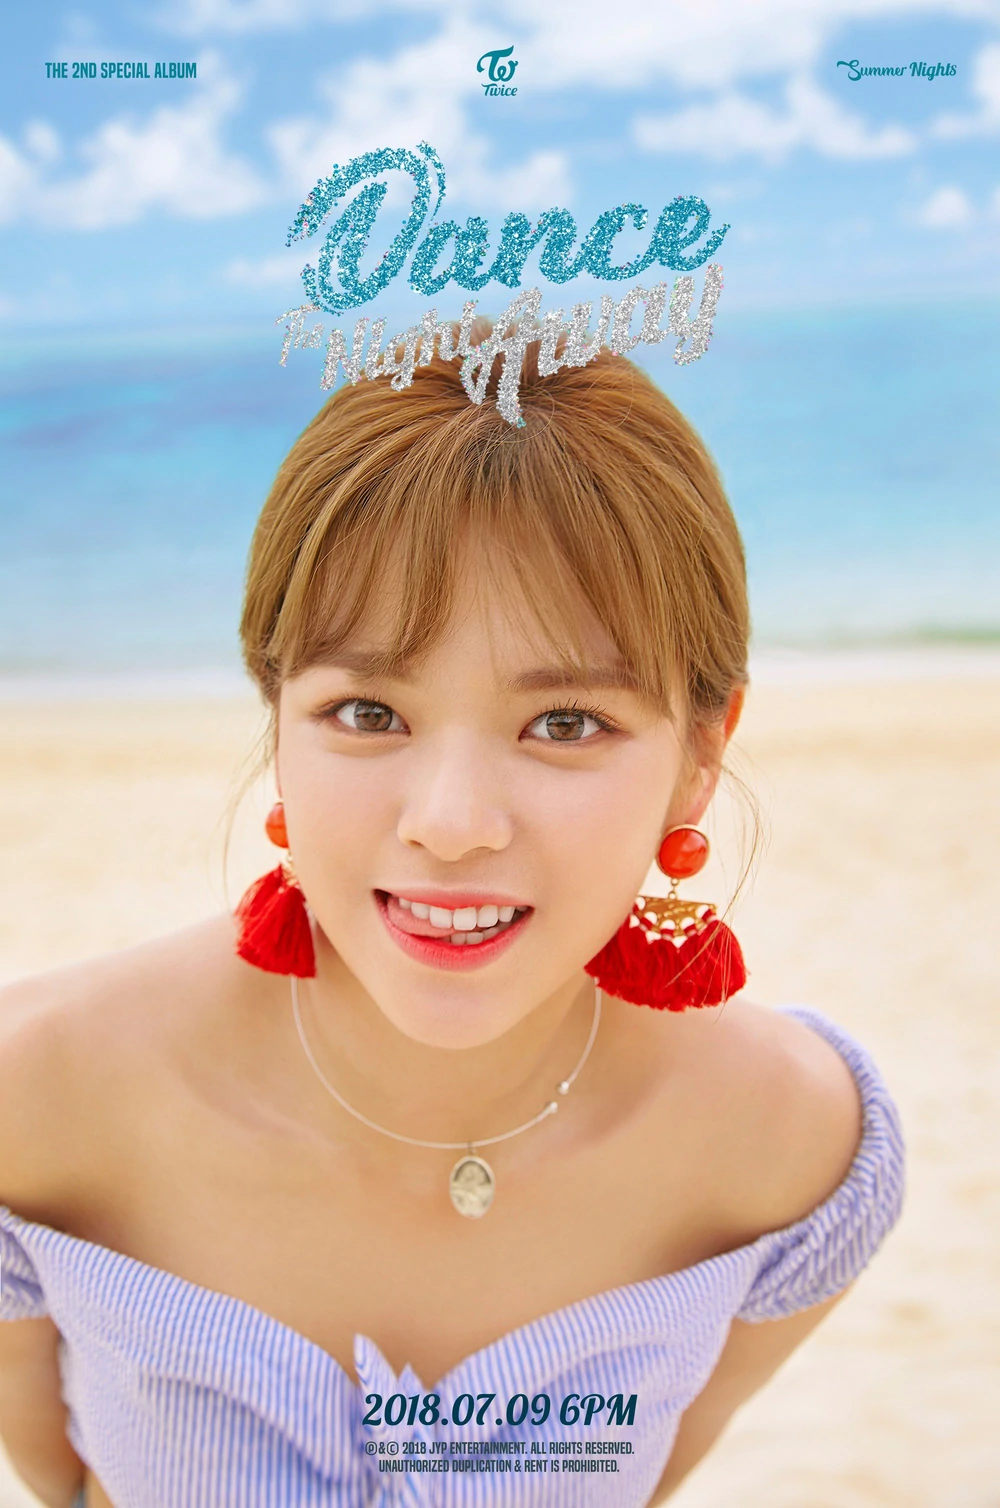 Twice Summer Nights Jeongyeon Concept Teaser Picture Image Photo Kpop K-Concept 3